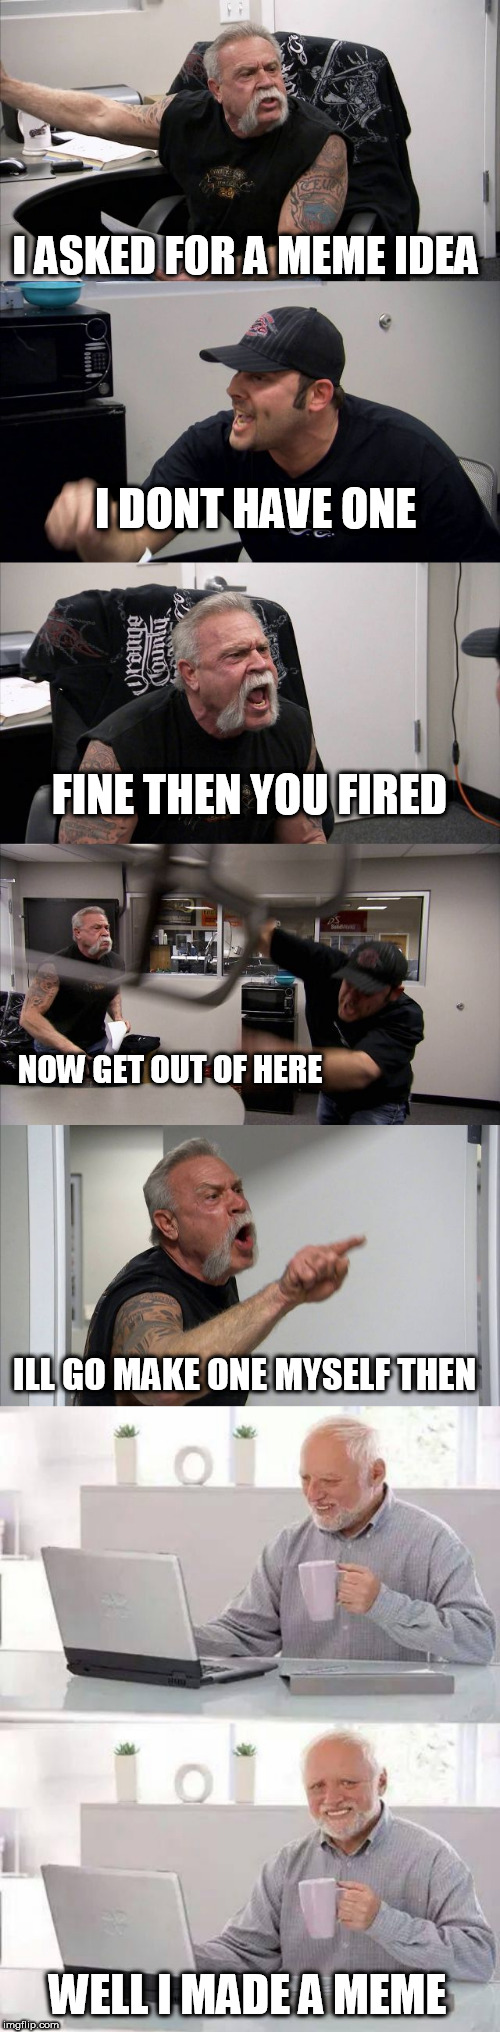 when u have no meme ideas | I ASKED FOR A MEME IDEA; I DONT HAVE ONE; FINE THEN YOU FIRED; NOW GET OUT OF HERE; ILL GO MAKE ONE MYSELF THEN; WELL I MADE A MEME | image tagged in memes,hide the pain harold,american chopper argument | made w/ Imgflip meme maker